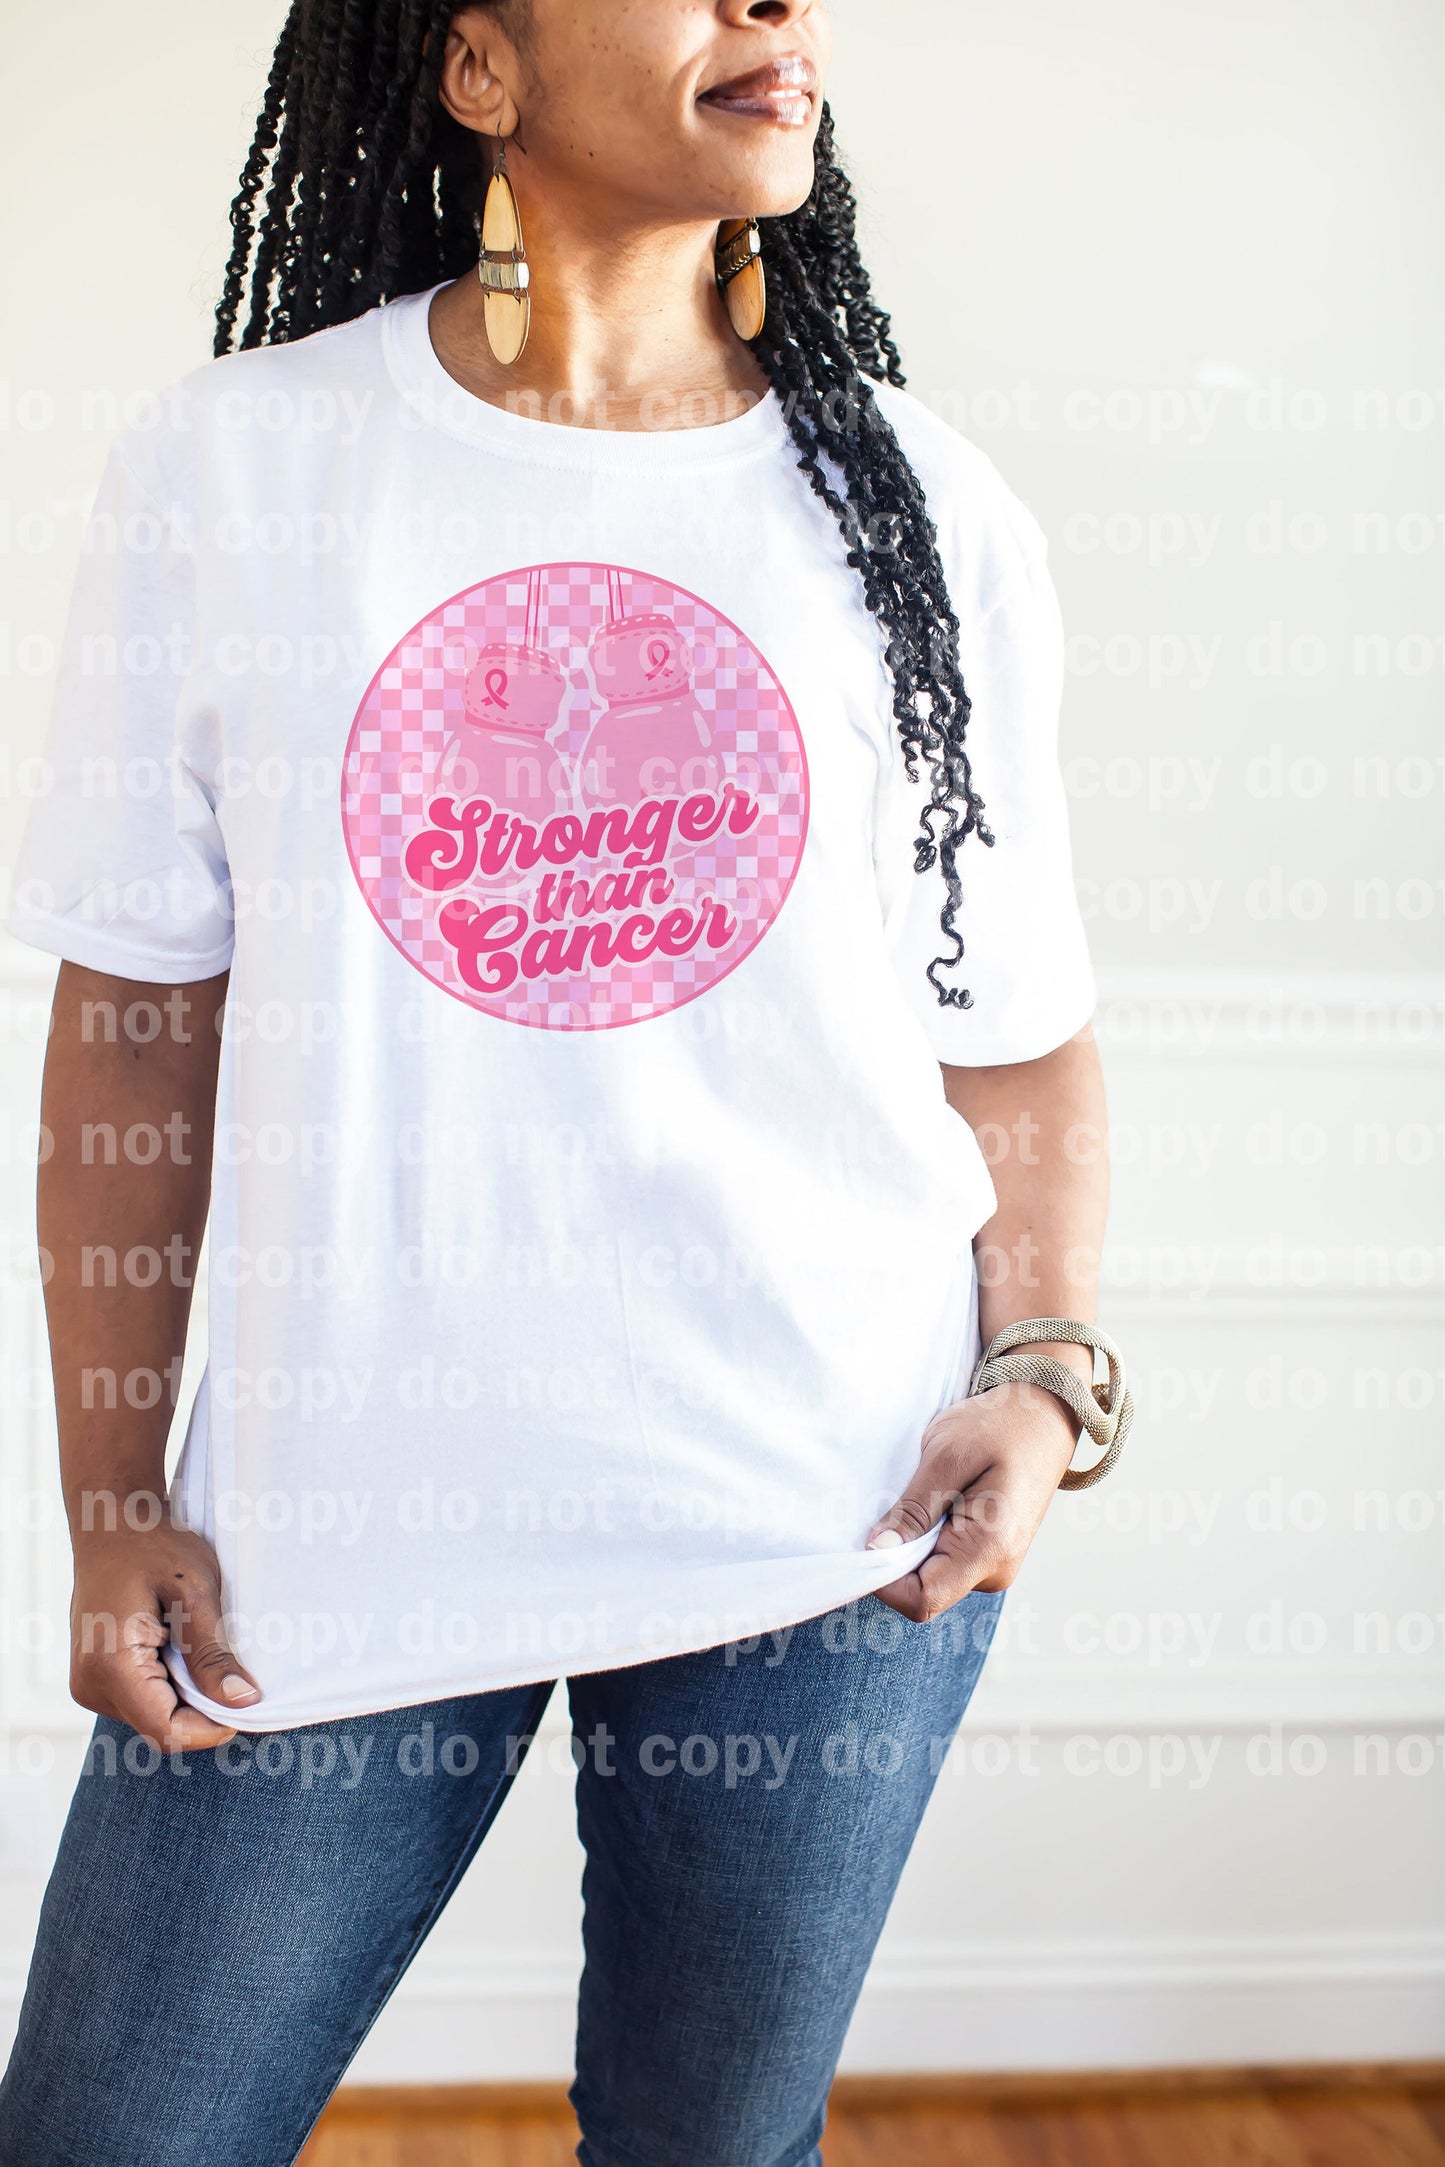 Stronger Than Cancer Dream Print or Sublimation Print